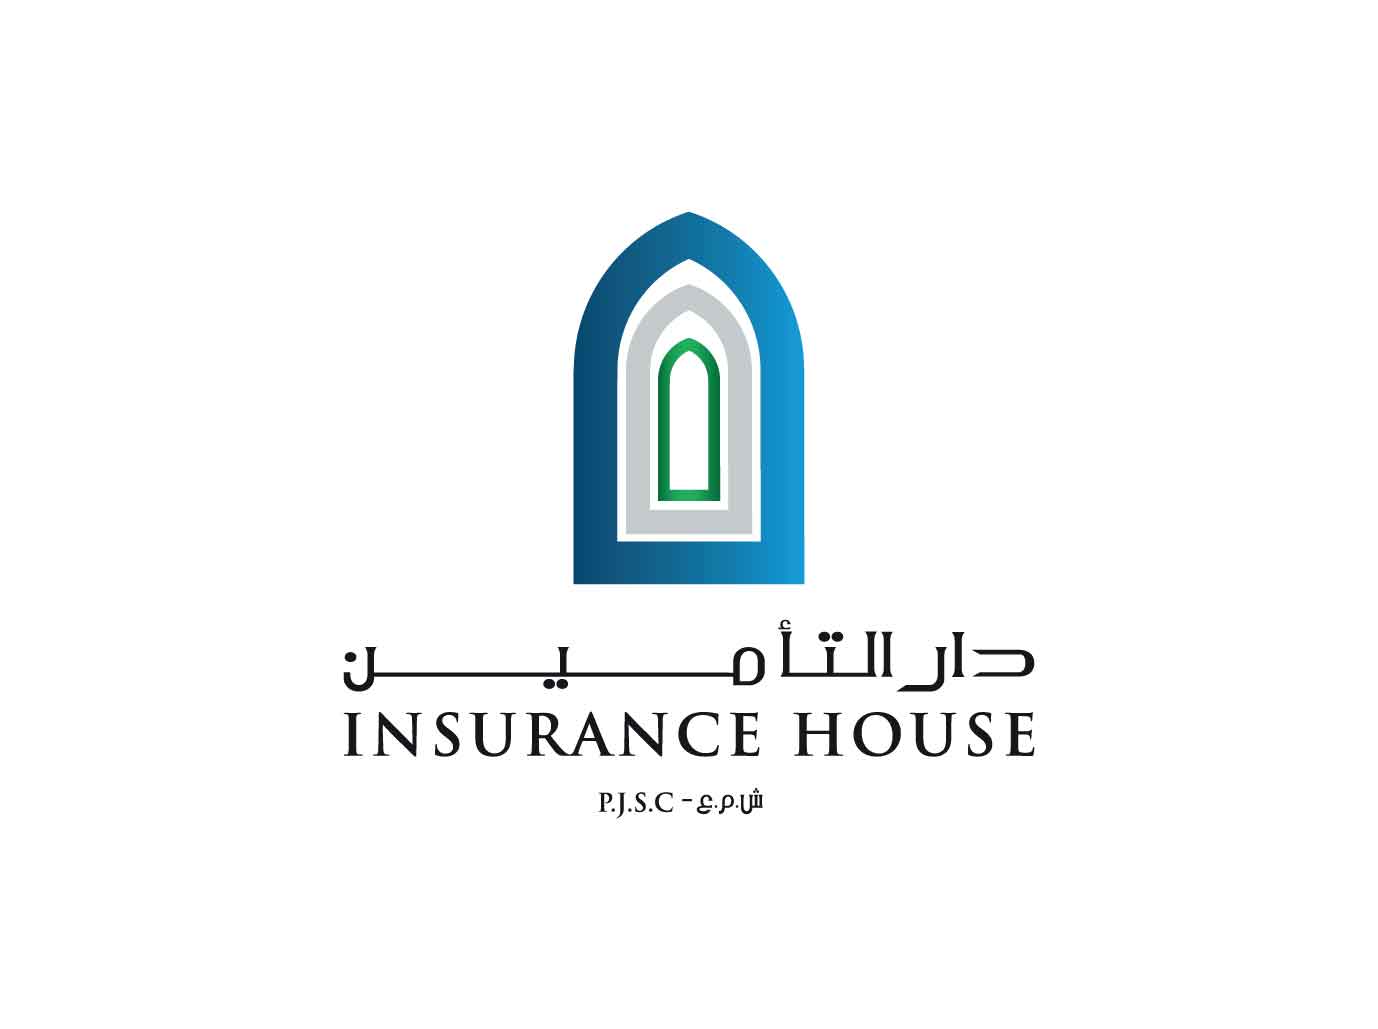 Insurance House Champions Safe Driving with a 28% Discount on Motor Insurance for ‘Accident-Free Day’